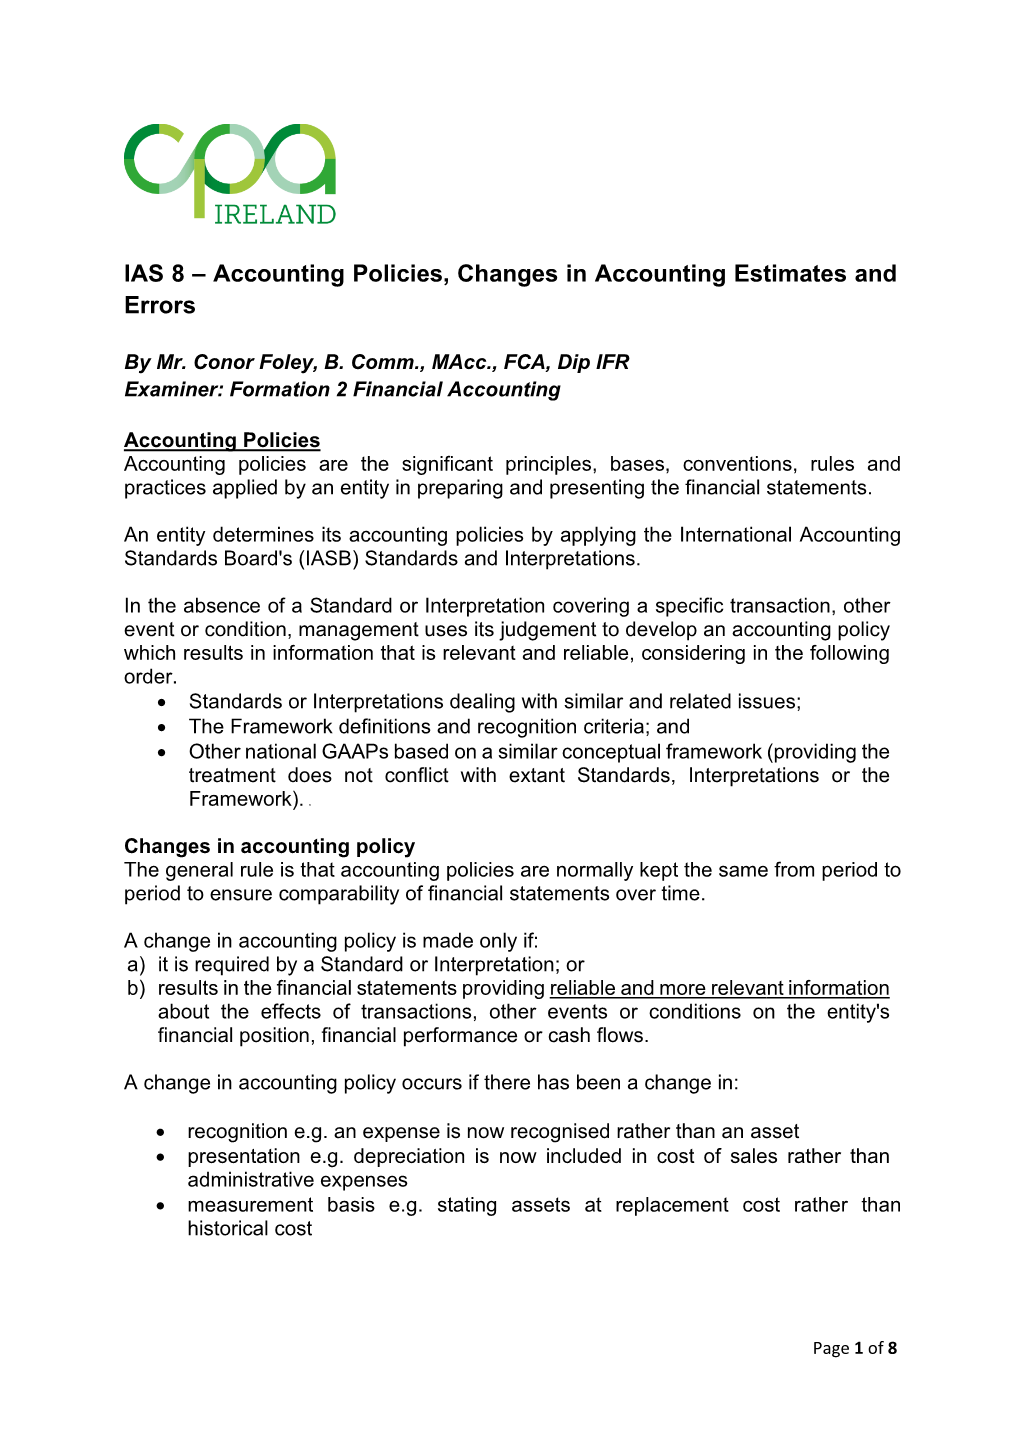 IAS 8 – Accounting Policies, Changes in Accounting Estimates and Errors